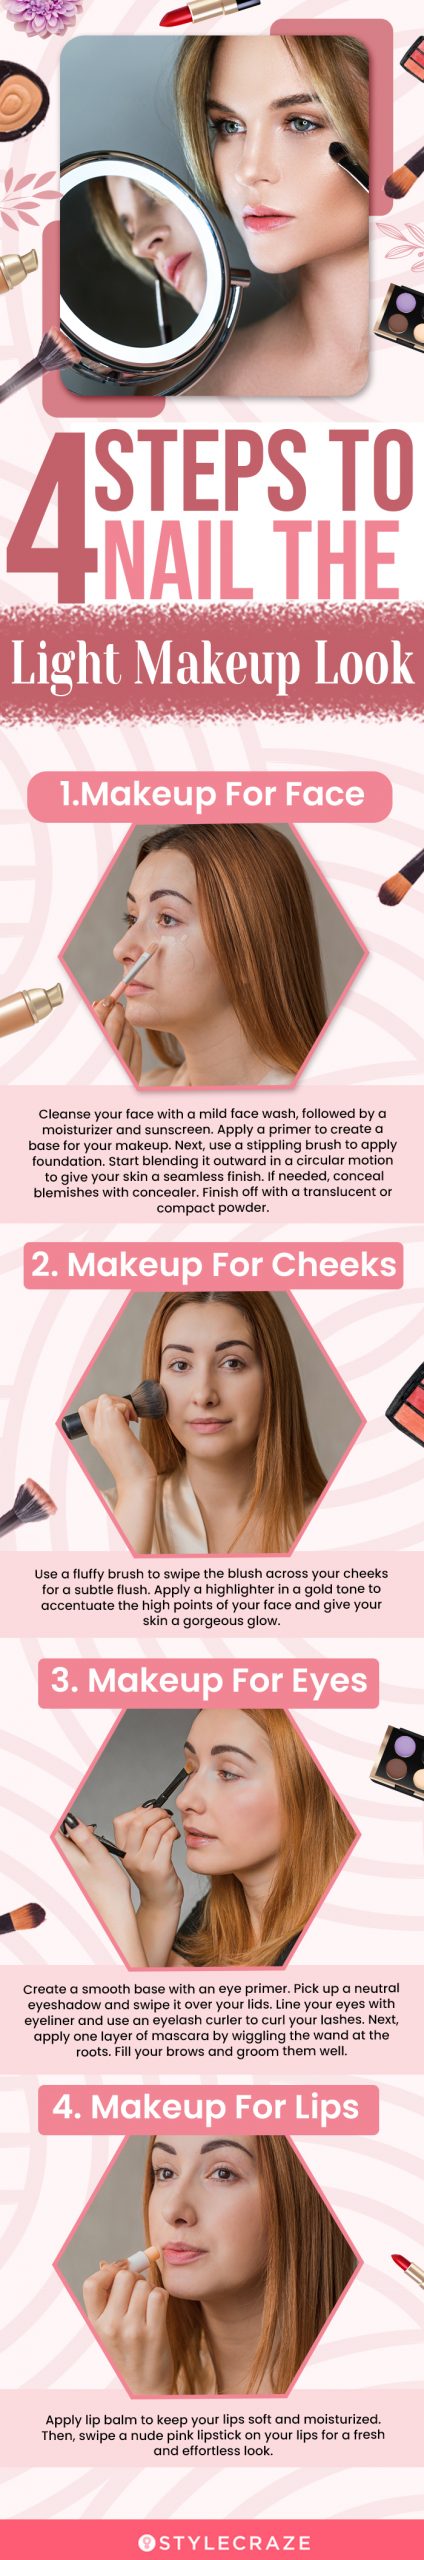 4 steps to nail the light makeup look(infographic)